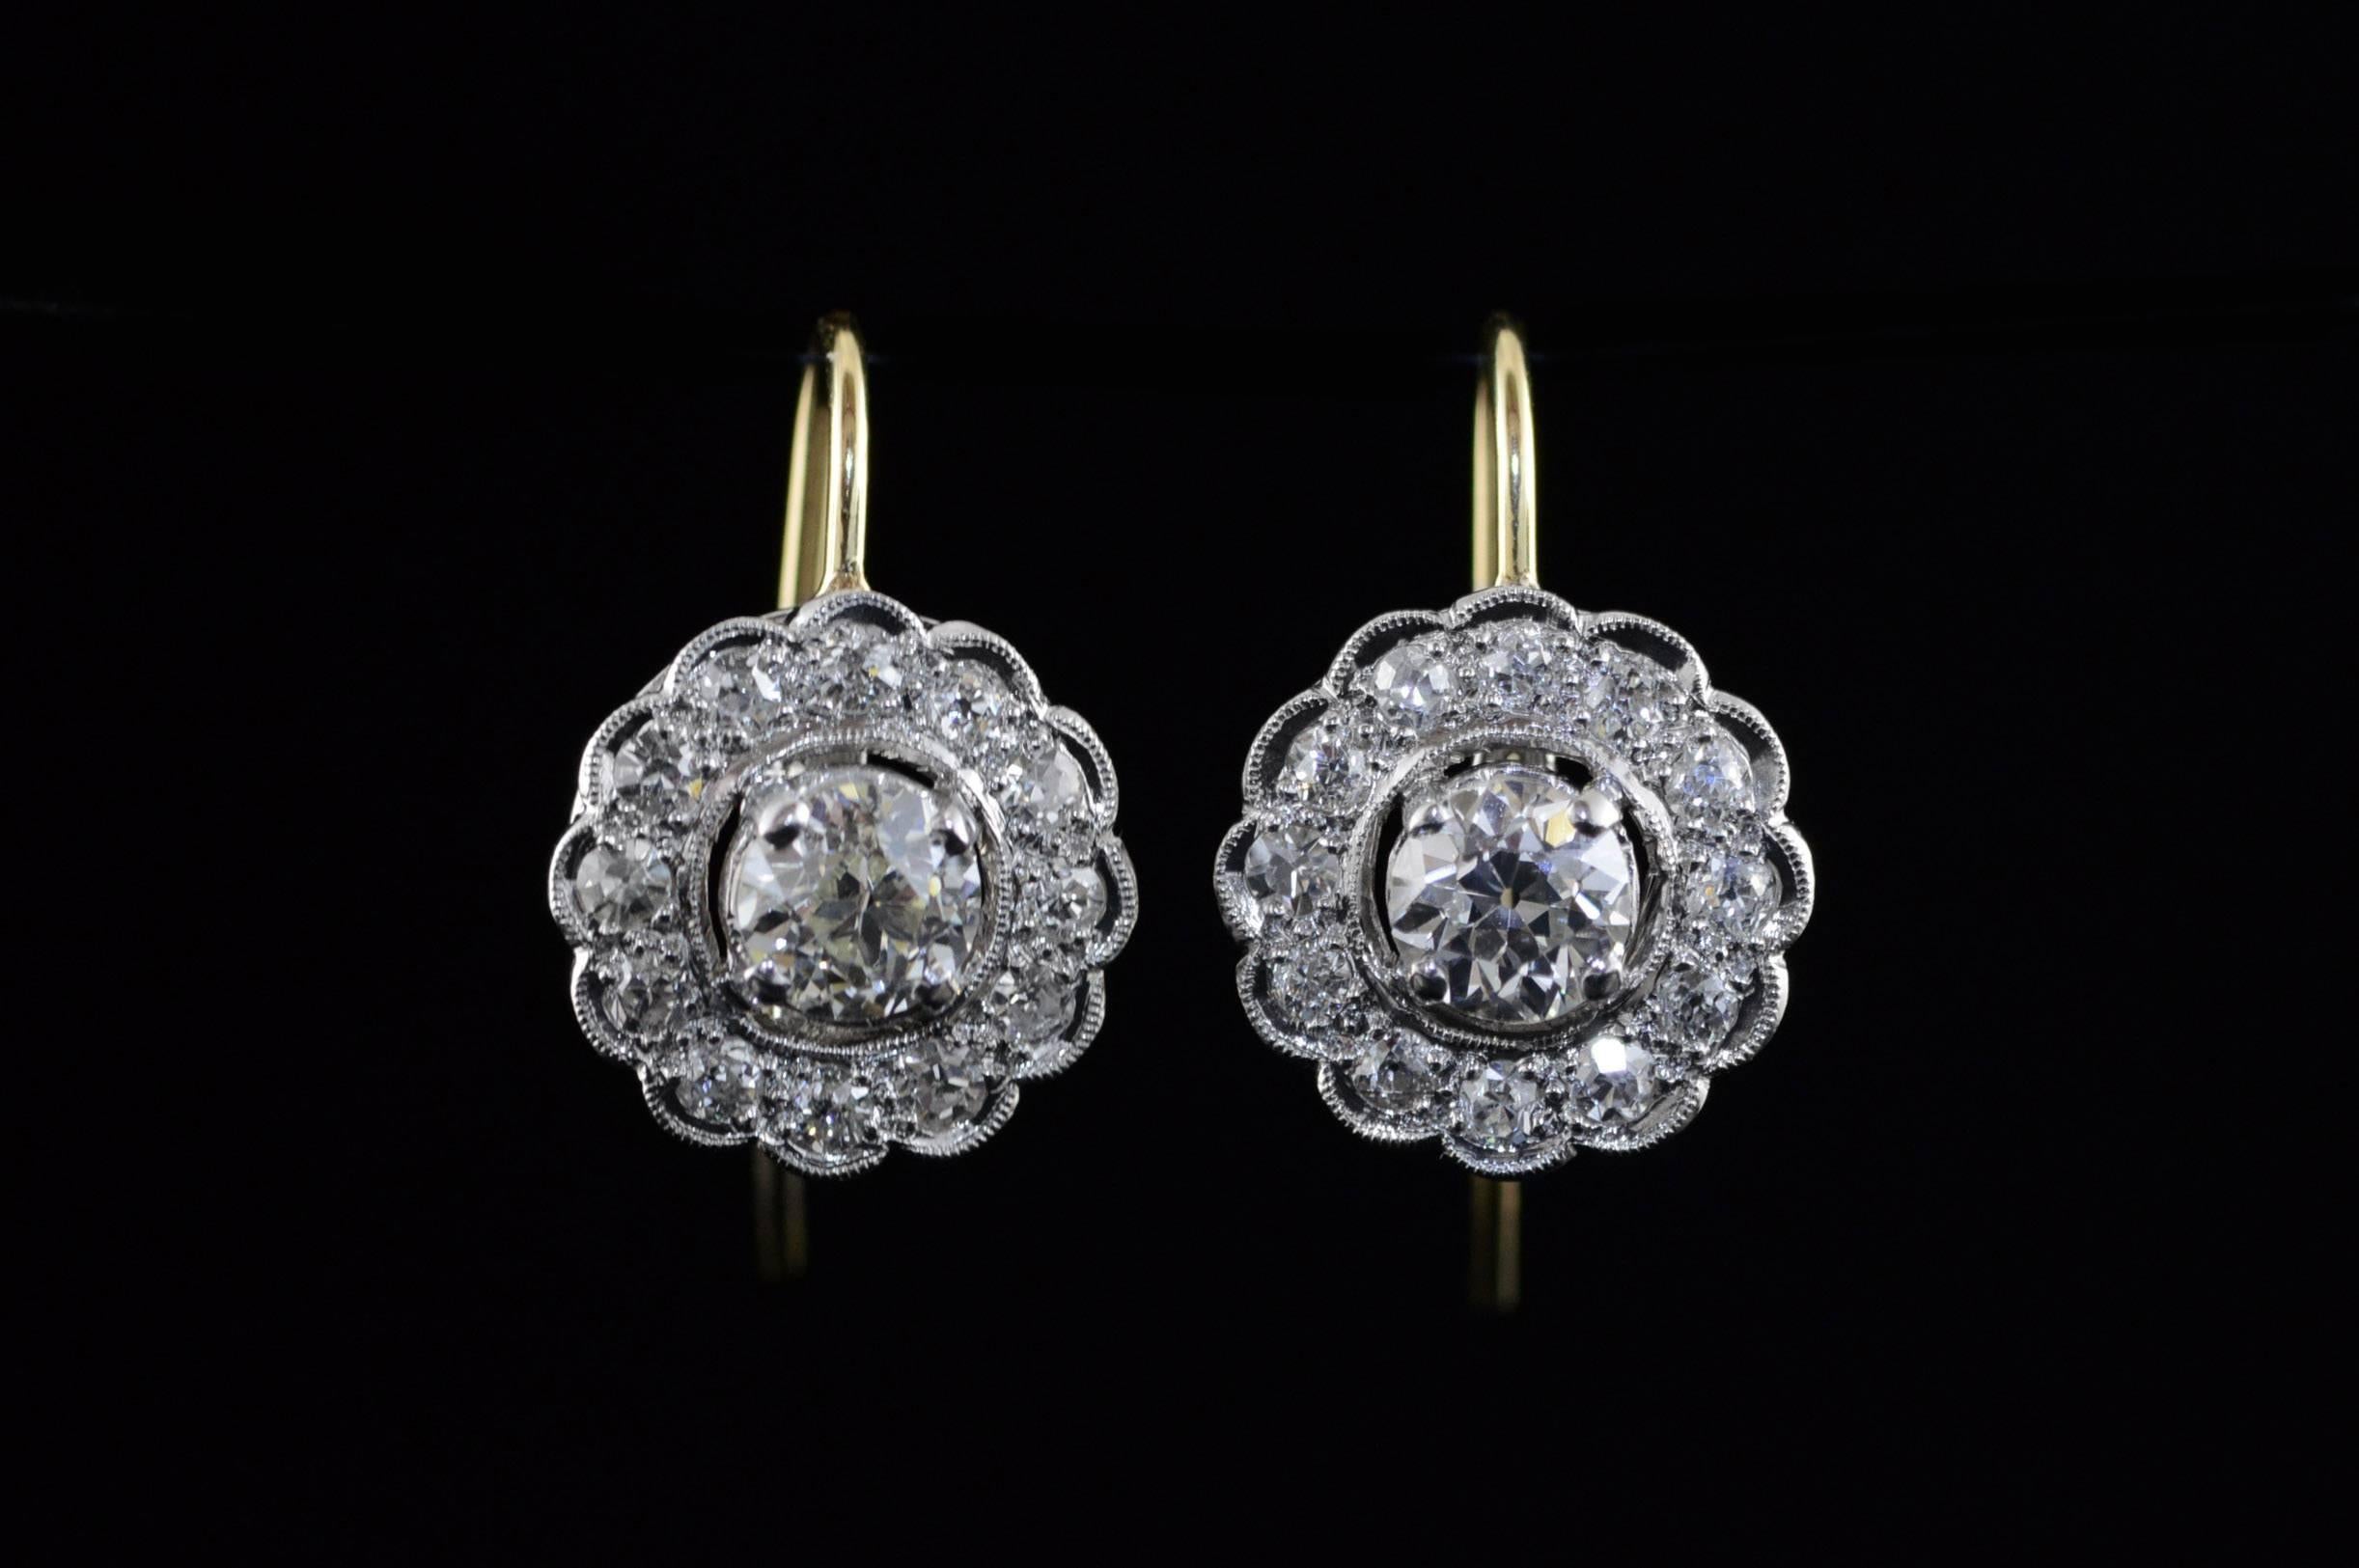 All diamonds are graded according to GIA grading standards. (When applicable)

·Item: 14K 1.92 CTW Diamond Art Deco Two Tone Hook Earrings White Gold

·Era: Victorian / 1880s

·Composition: 14k Gold Marked / Tested

·Gem Stone: 26x Diamonds=